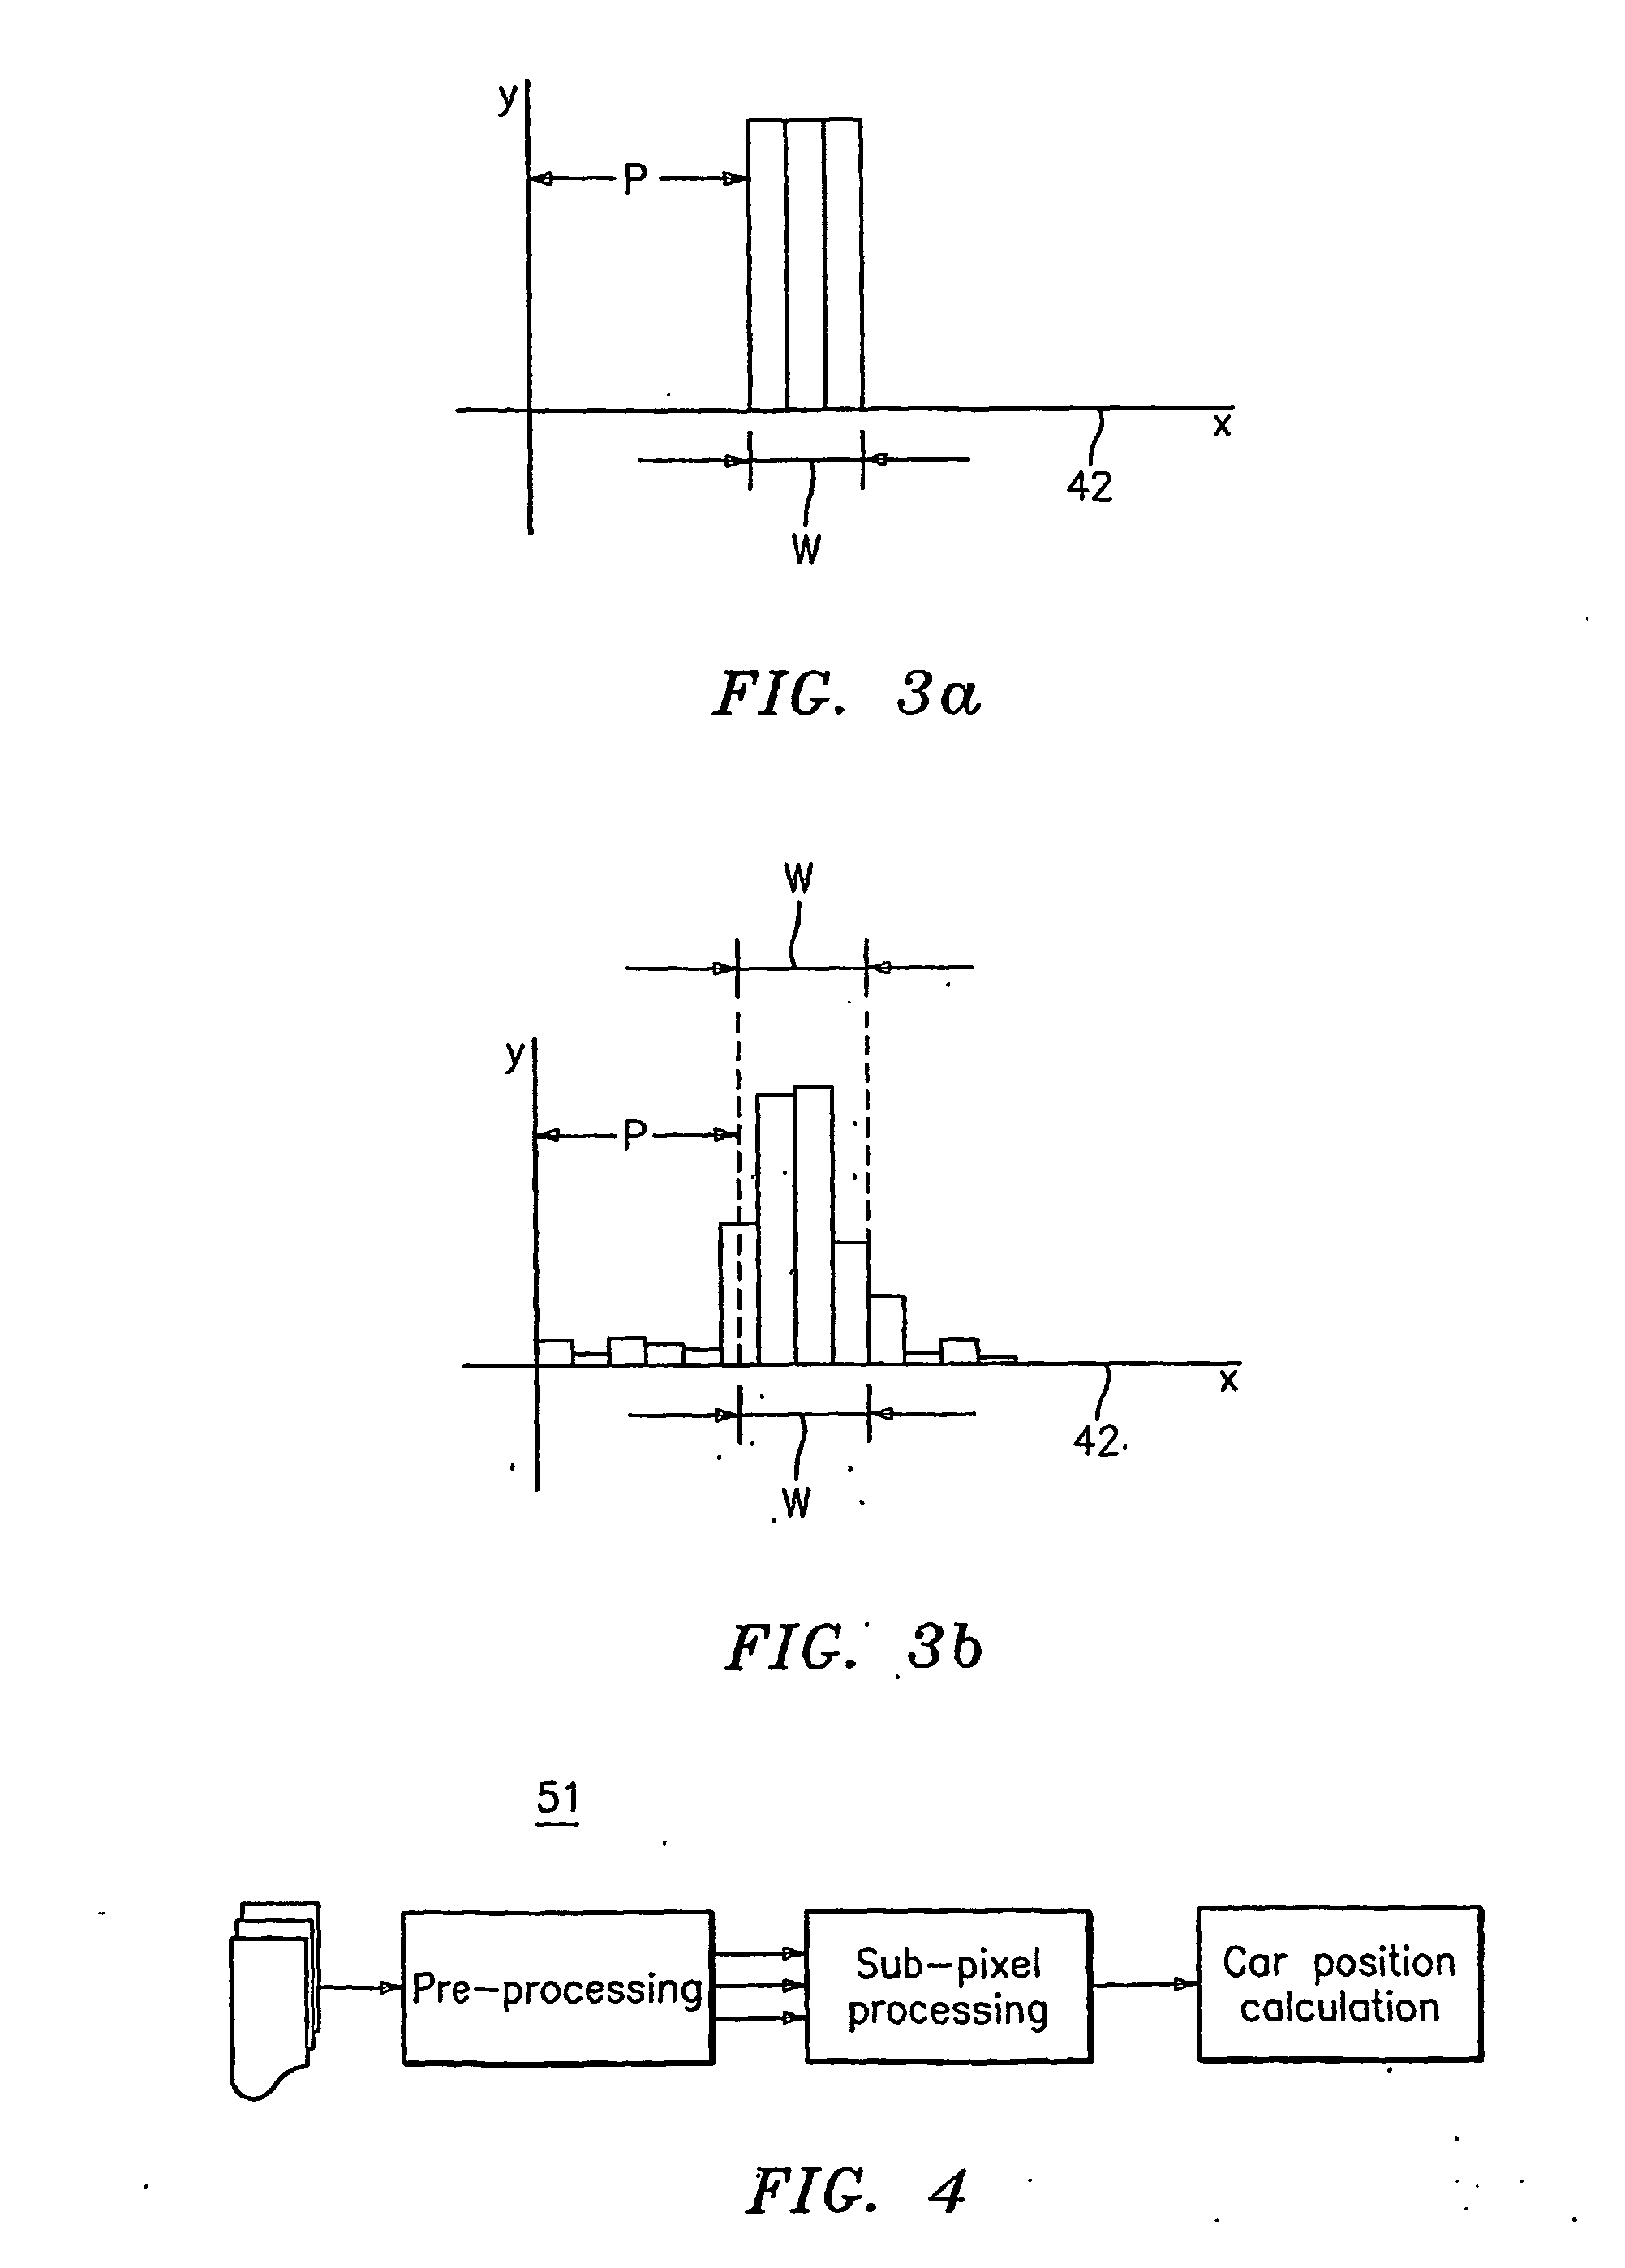 Rf id and low resolution ccd sensor based positioning system